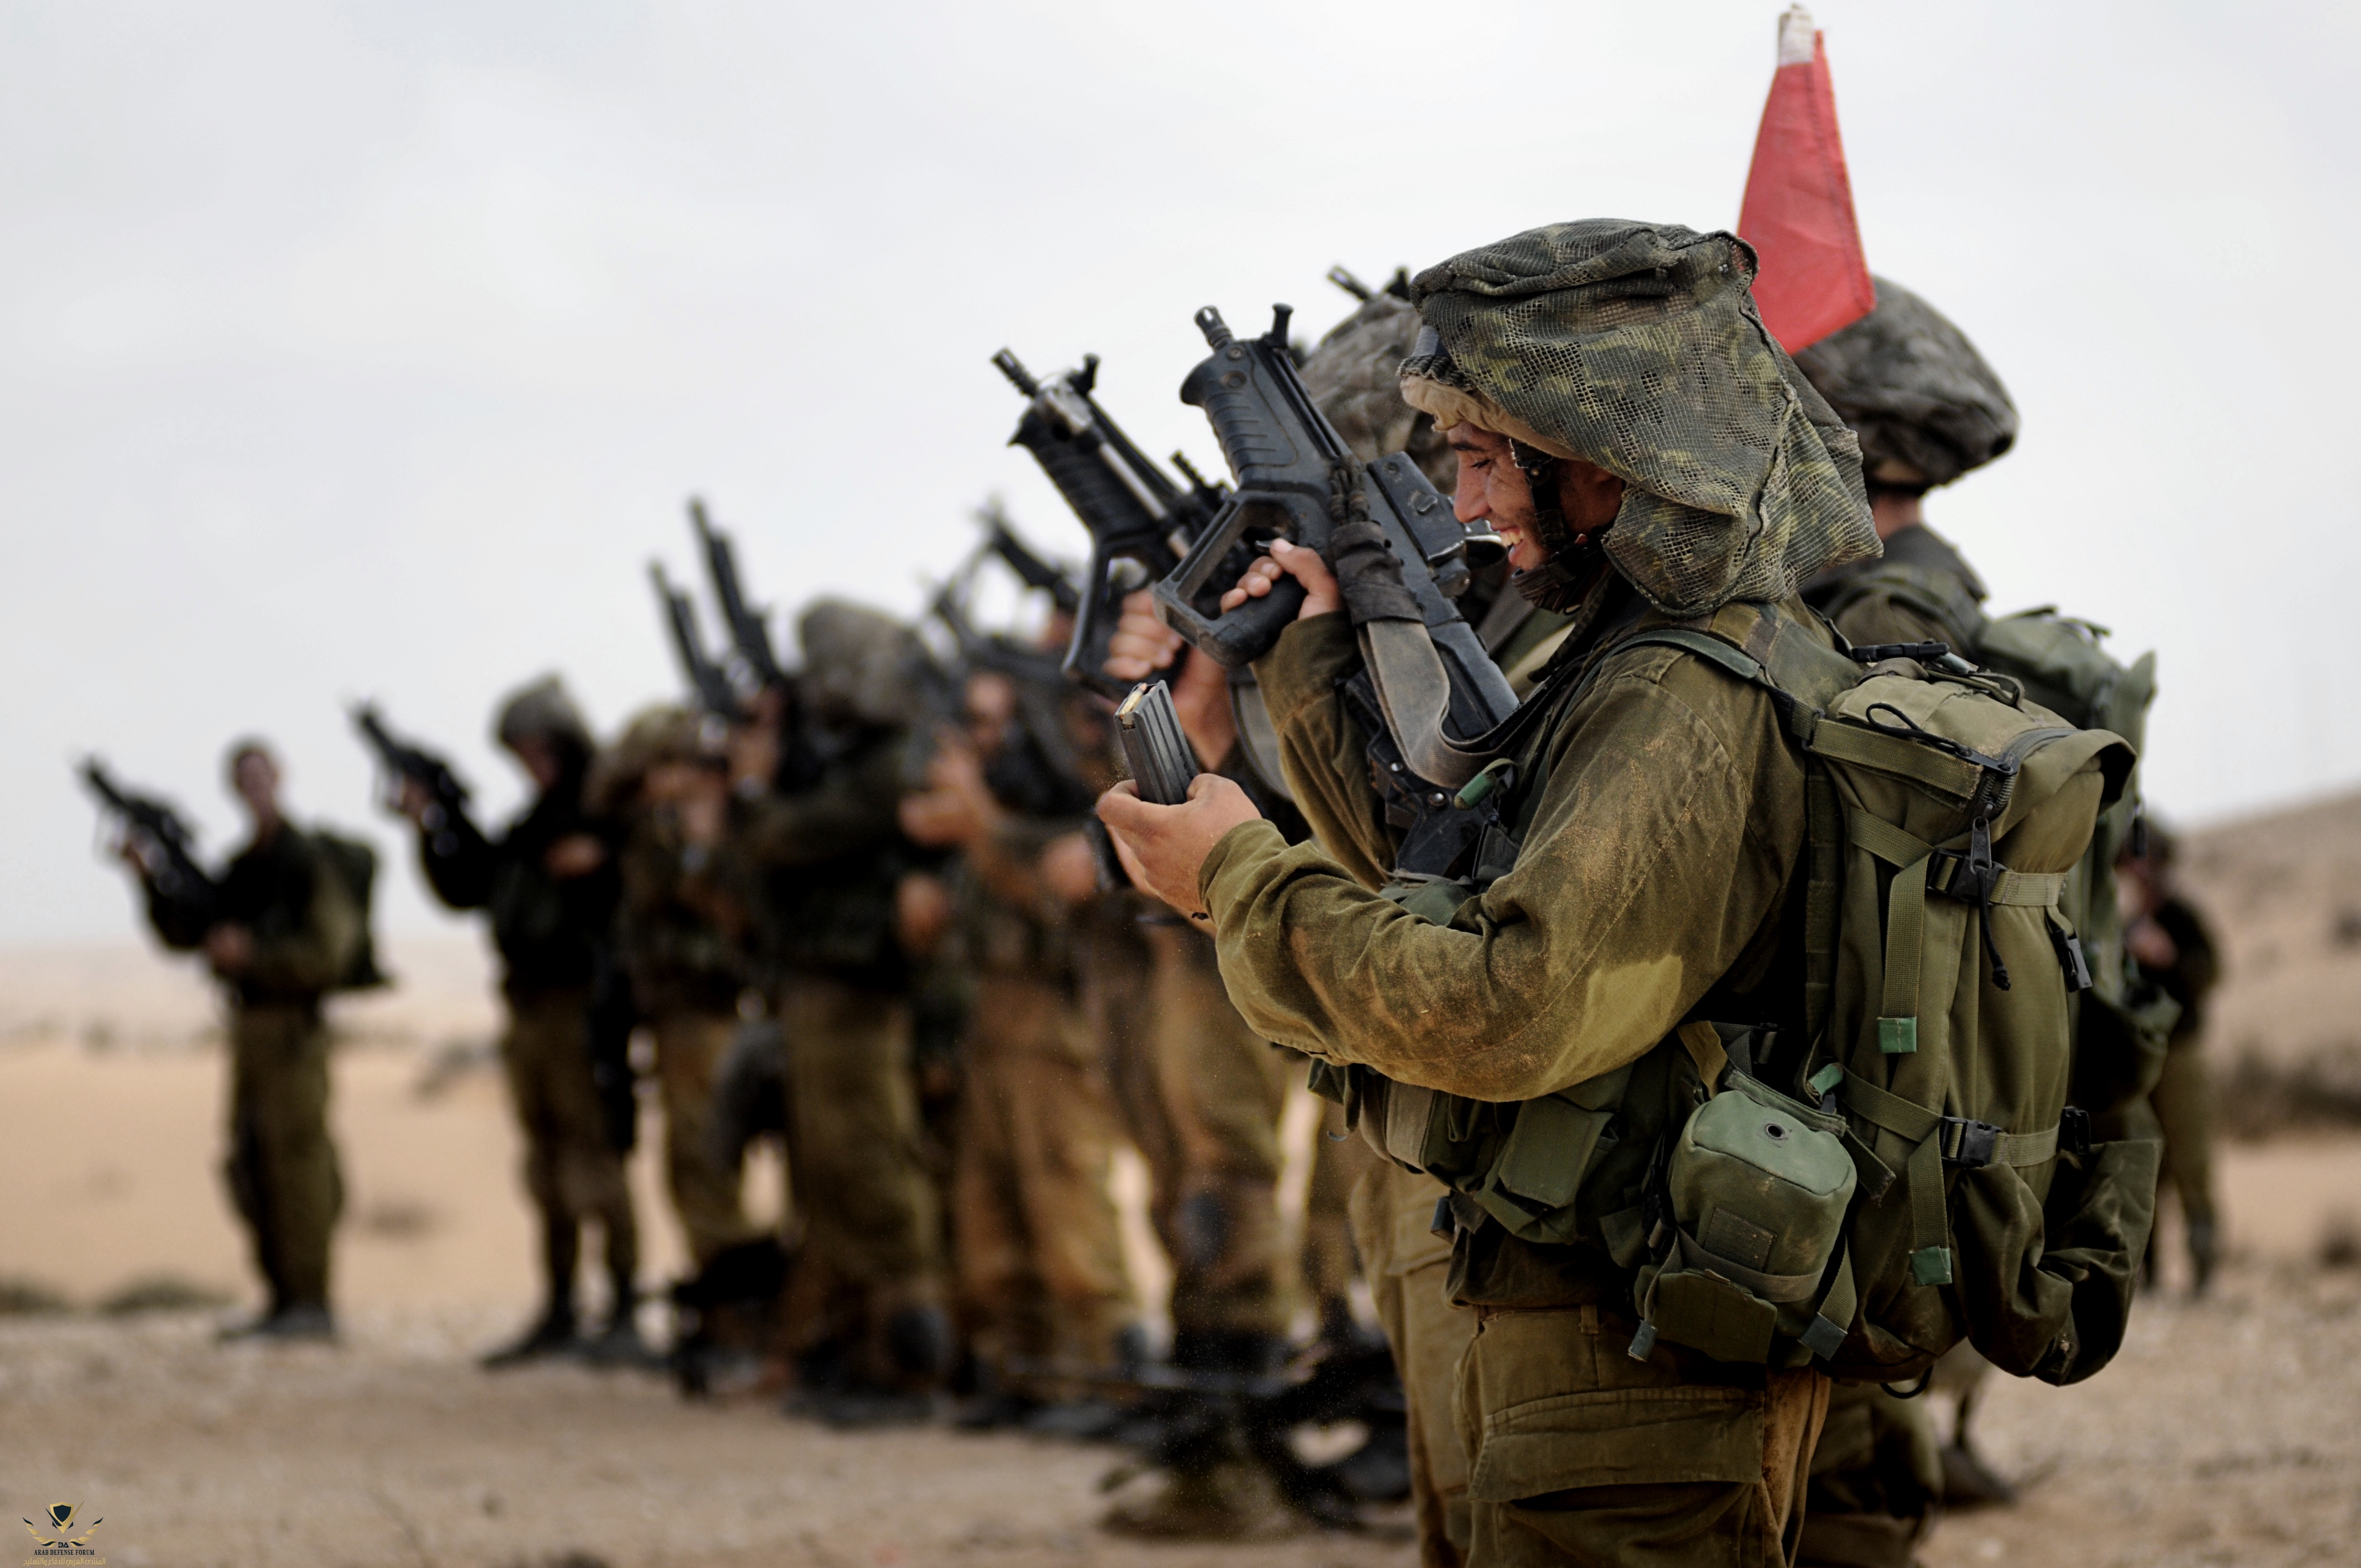 Flickr_-_Israel_Defense_Forces_-_Givati_Recon_Company_at_Training,_Aug_2009.jpg